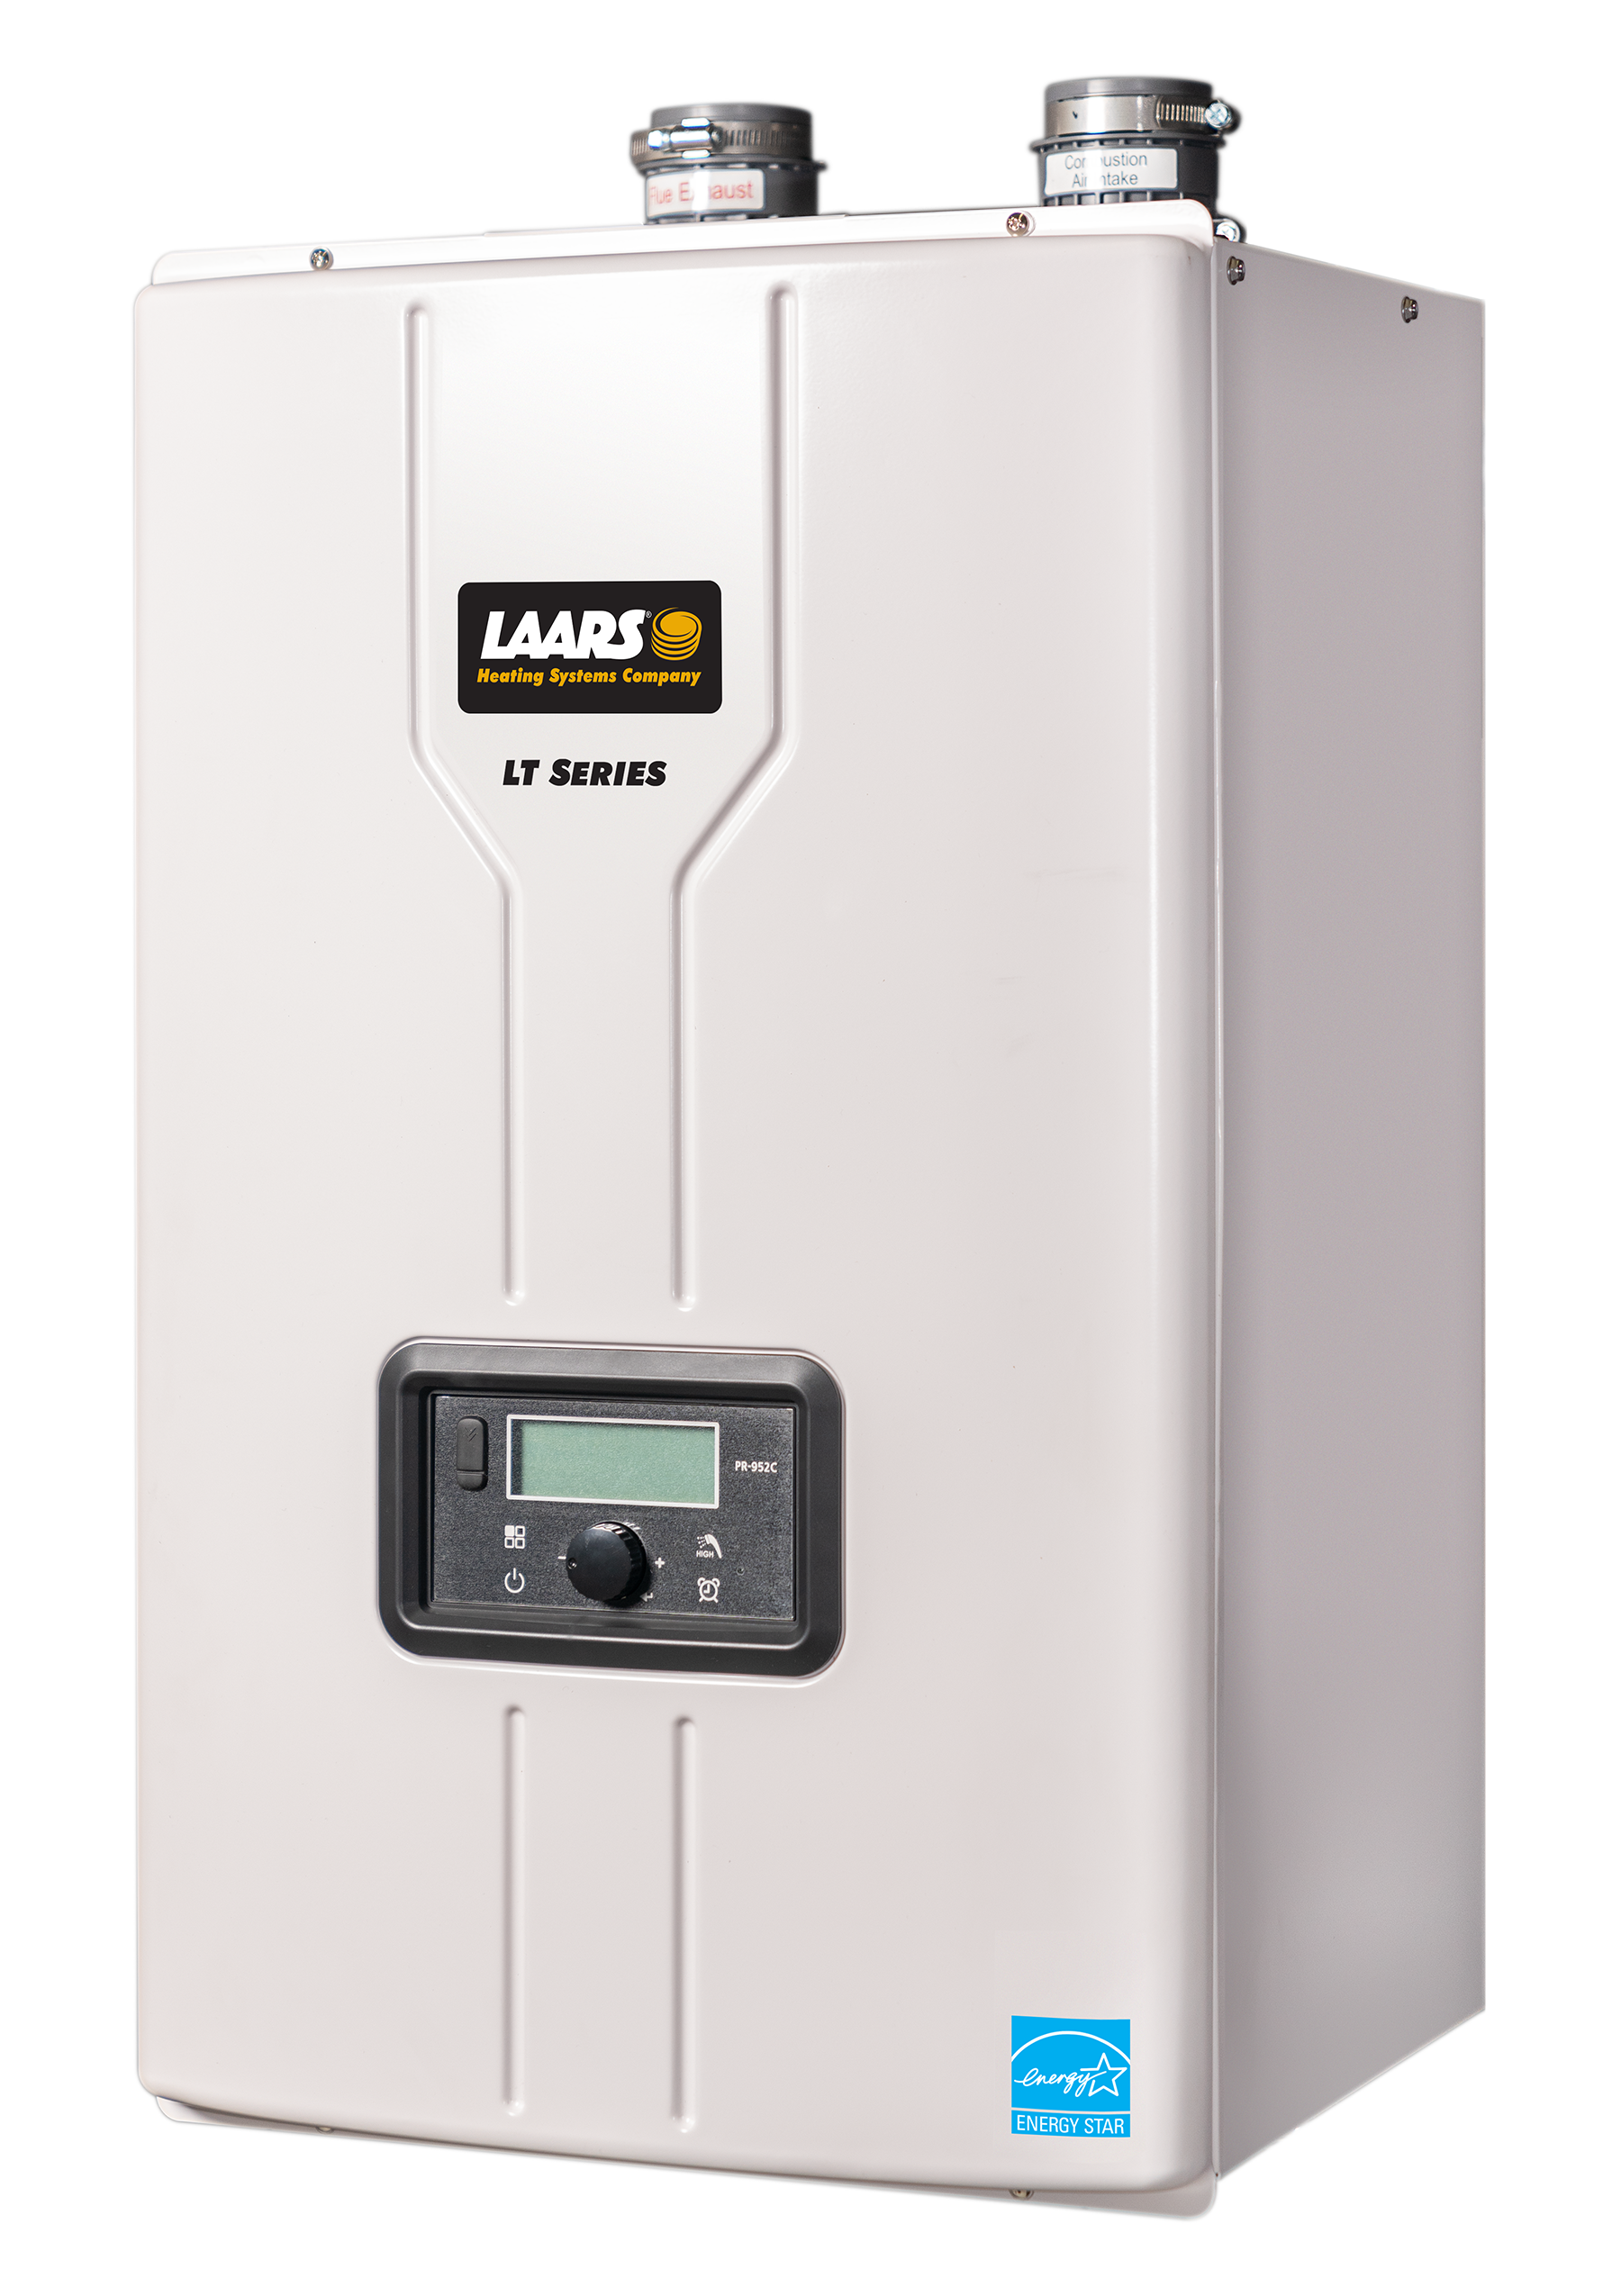 FT Series Floor Boiler paired with Laars-Stor Indirect water heater